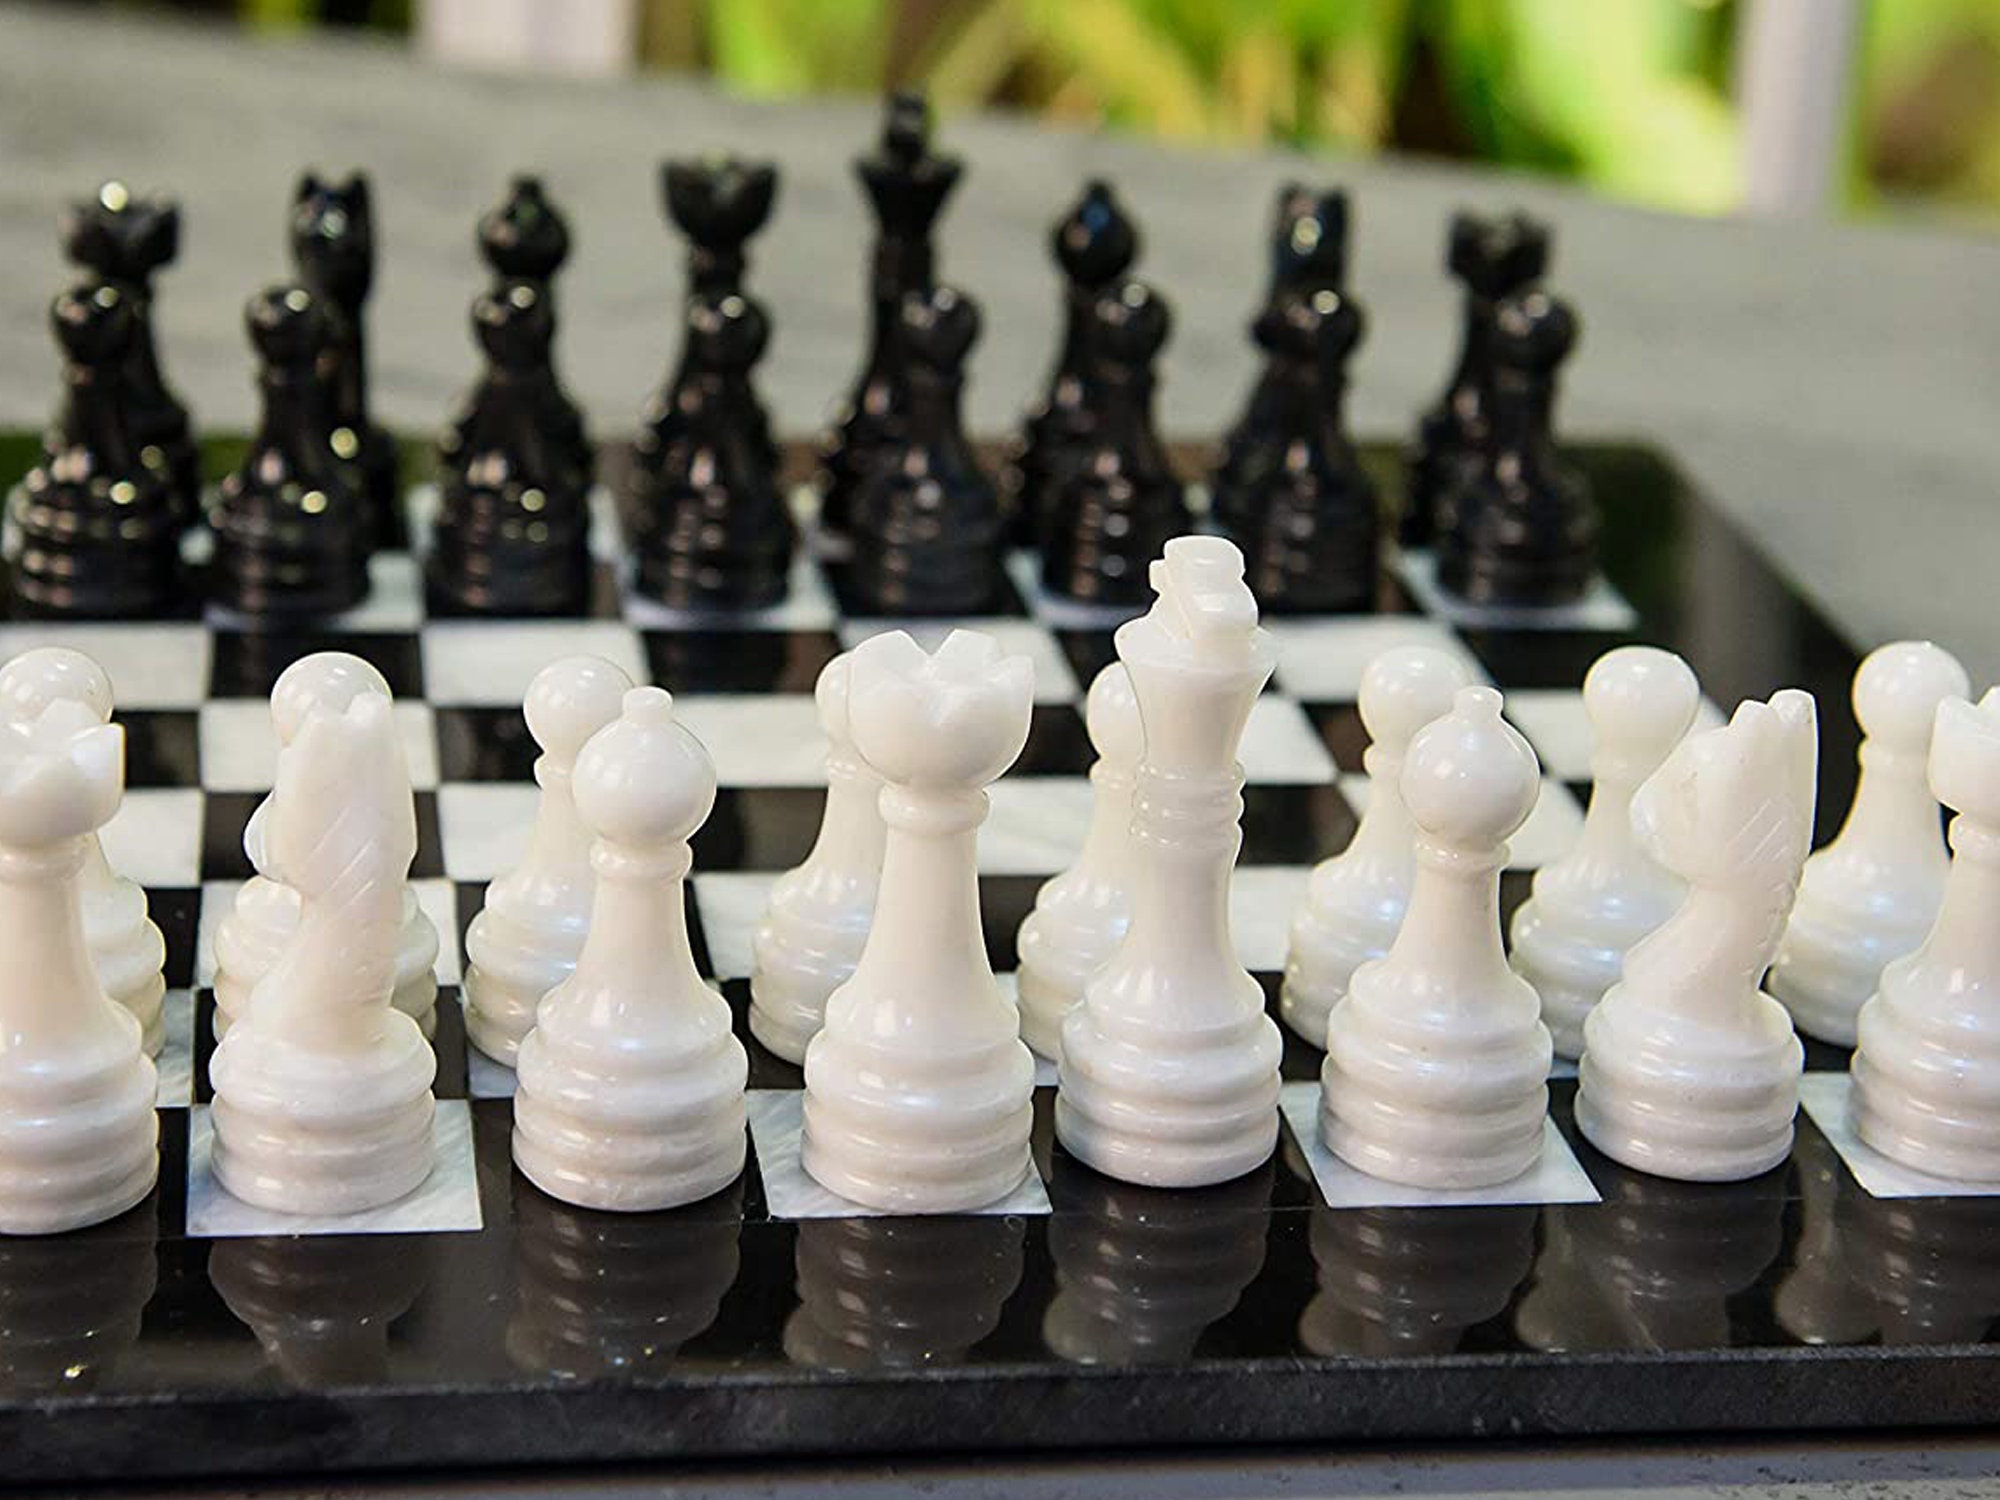 Radicaln Marble Chess Set with Storage Box 15 Inches White and Green Onyx  Handmade Chess Board for Adult Games - 1 Chess Board & 32 Chess Pieces for